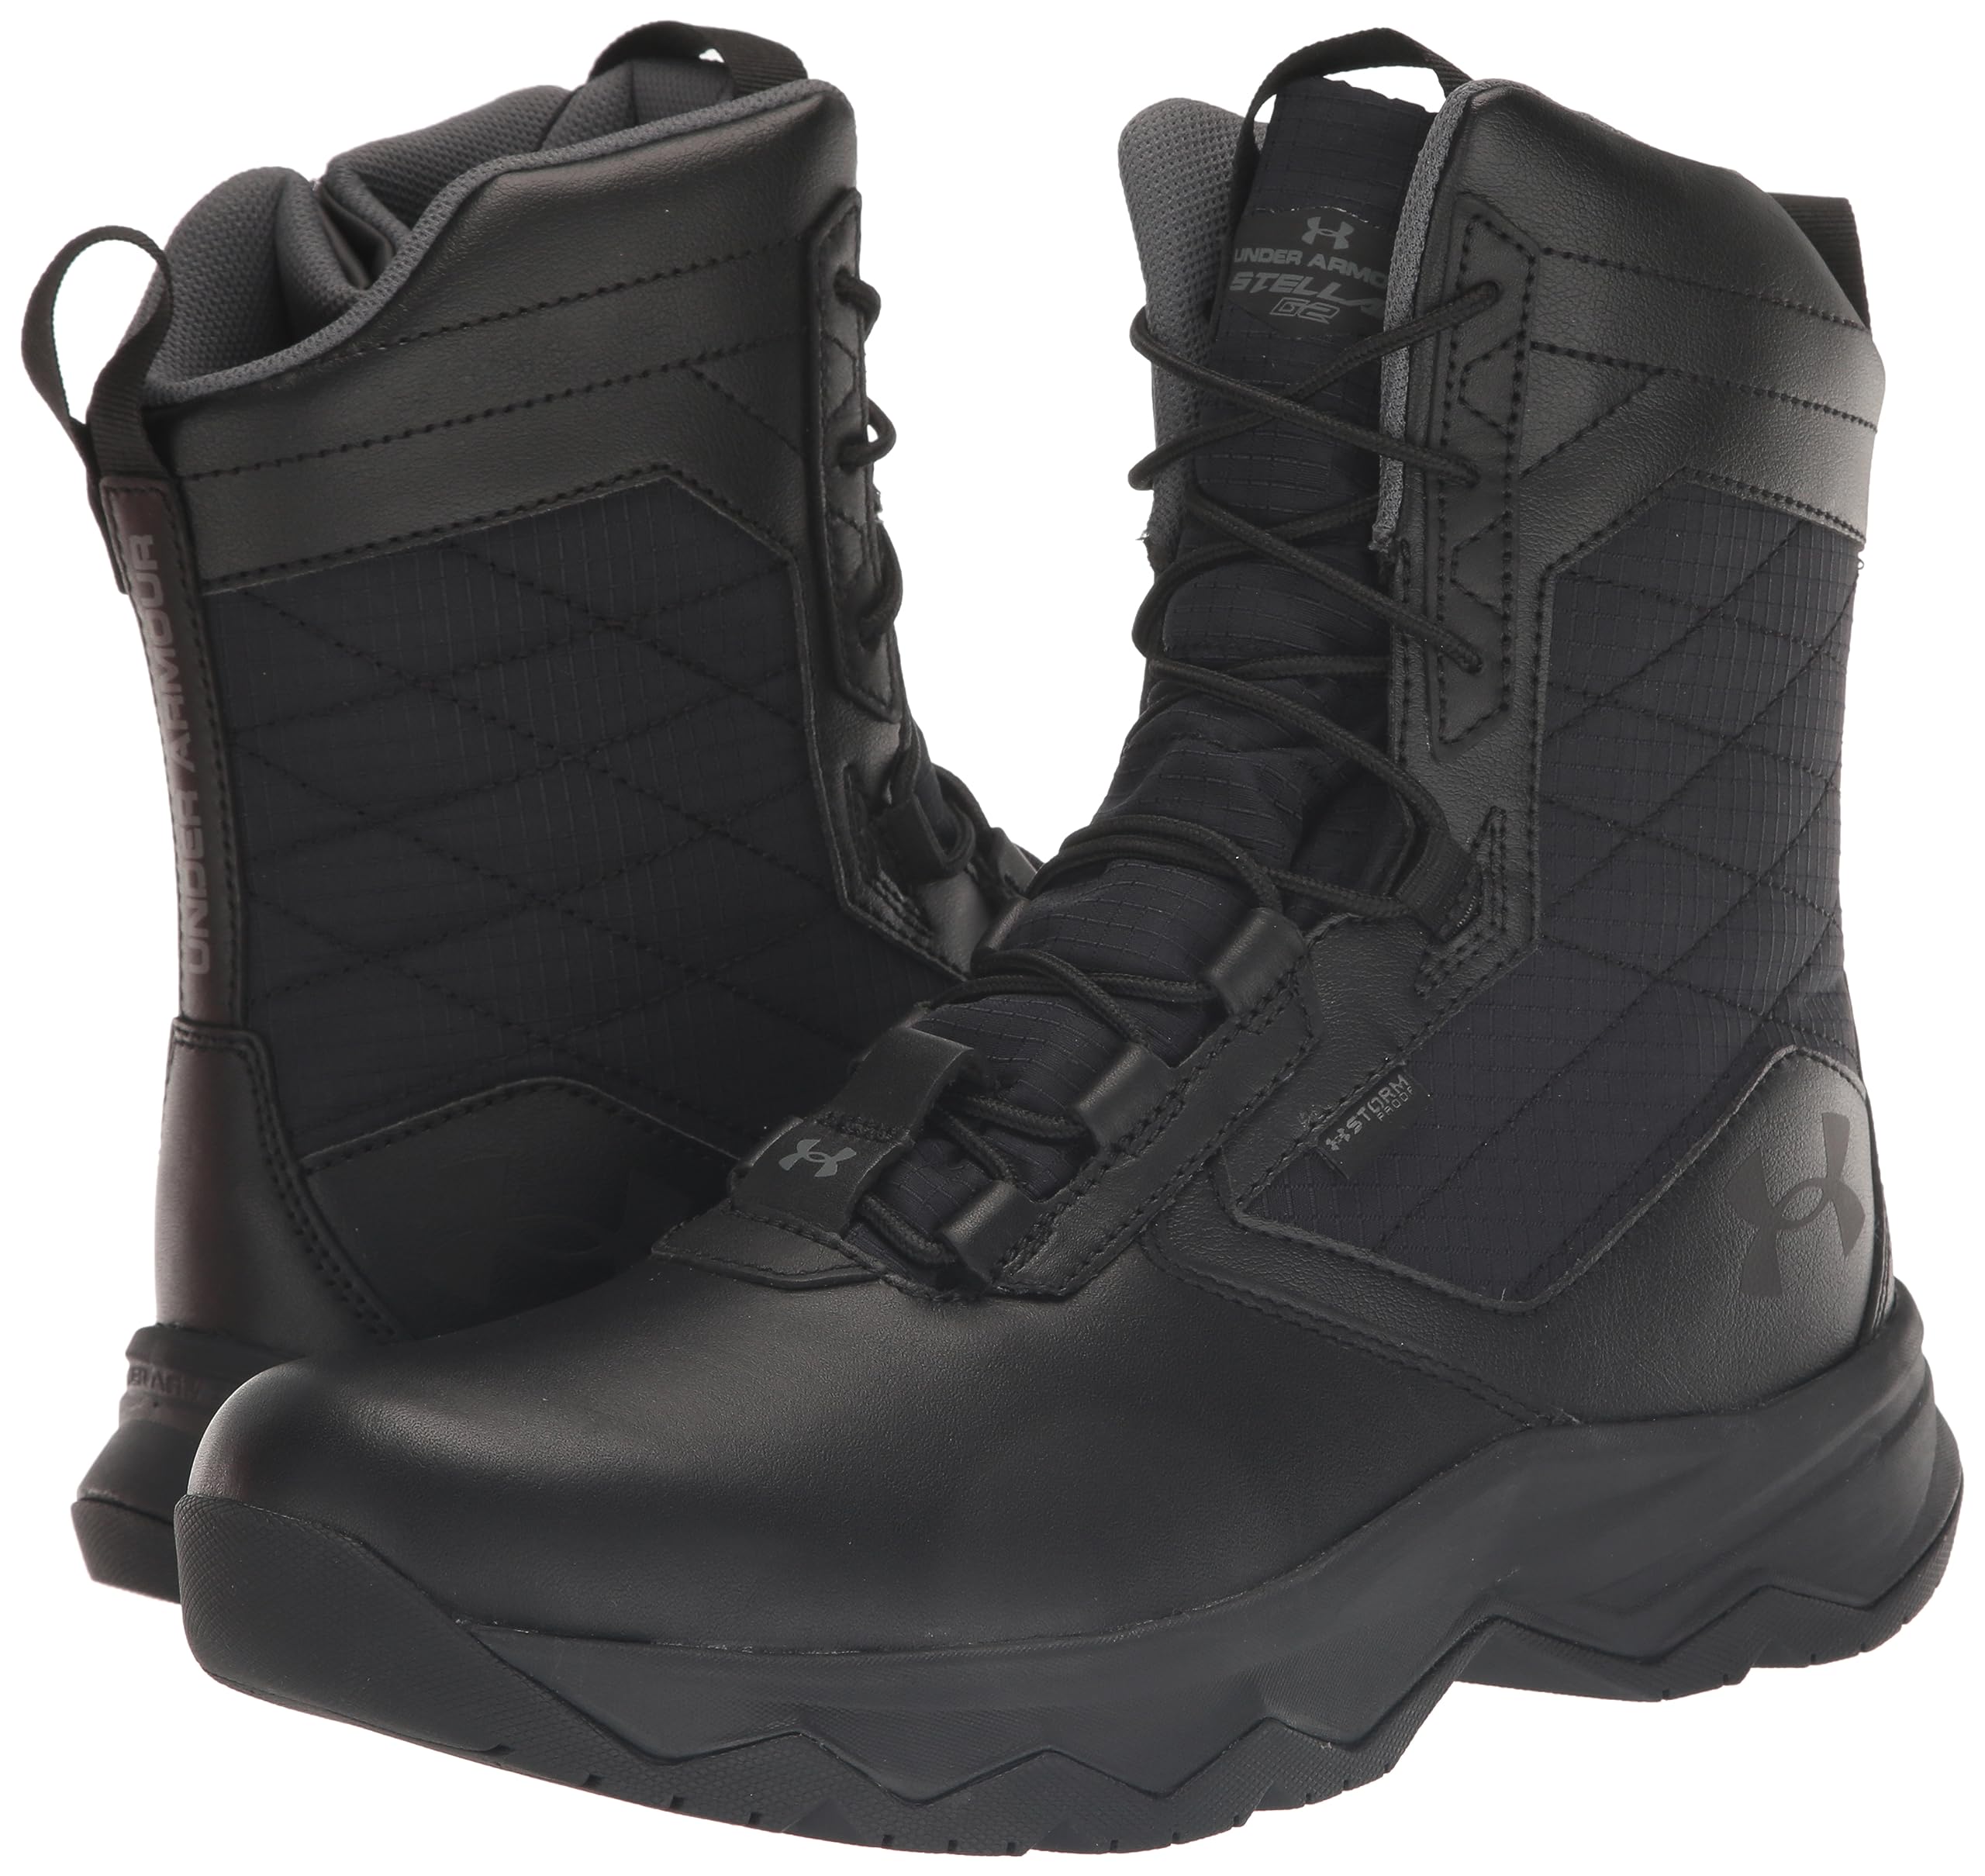 Under Armour Men's Stellar G2 Zip Waterproof Military and Tactical Boot